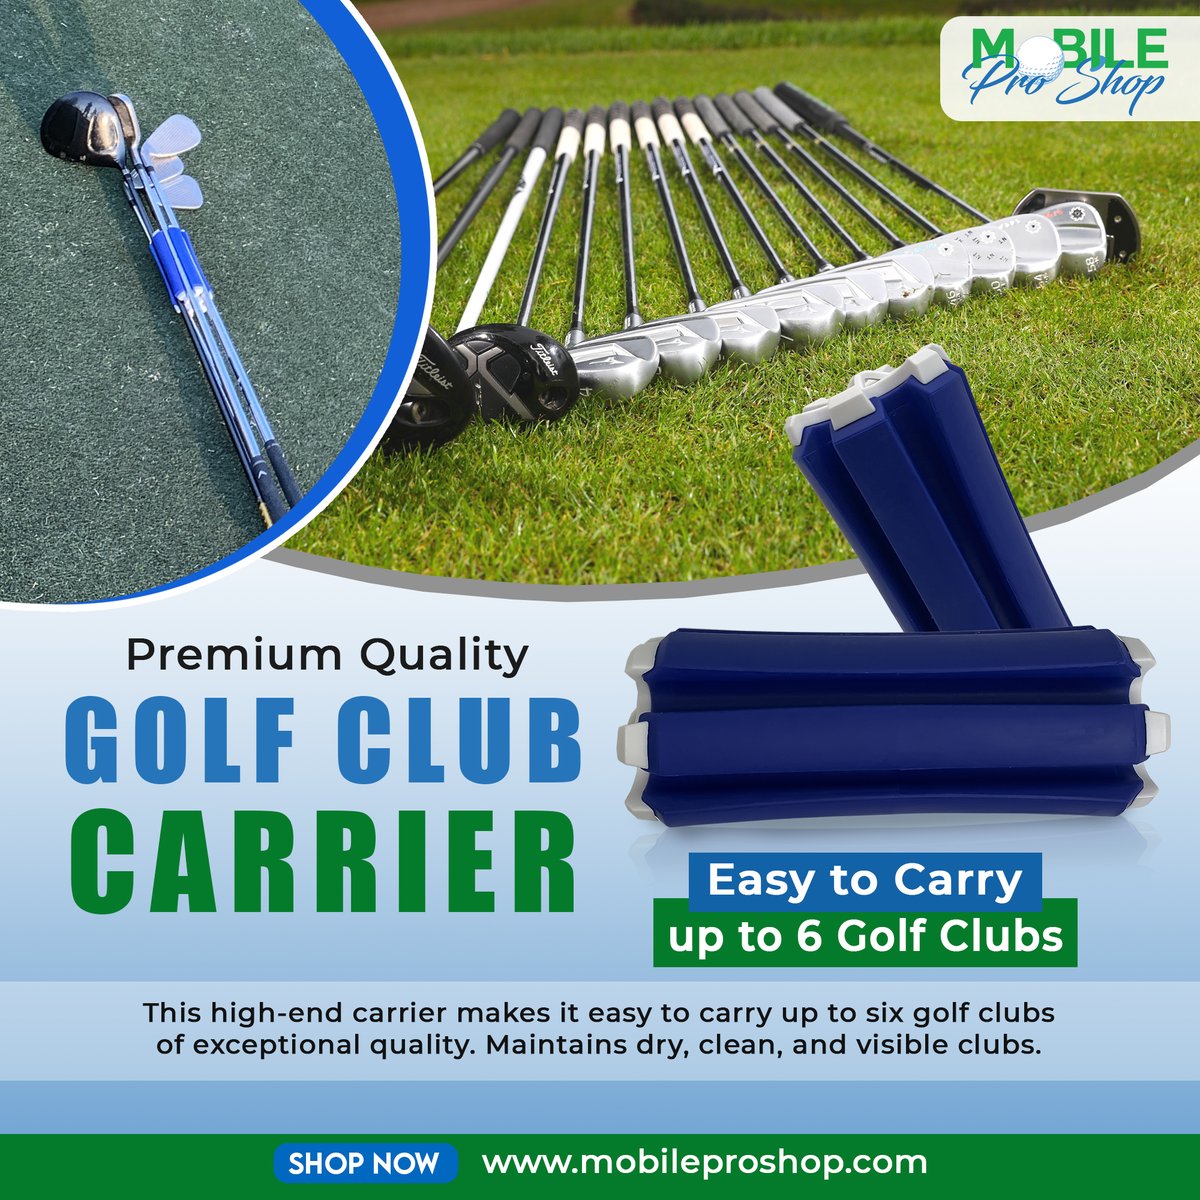 Mobile Pro Shop ,s Premium Quality Golf Club carrier hold 6 Golf club and keep it clean and dry !

#MobileProShop #GolfClubCarrier #PremiumQuality #MobileProShop #GolfGear #CompactDesign #EasyClamp #VisibleClubs #DryAndClean #ConvenientCarrying #QualityControl #GolfEssentials